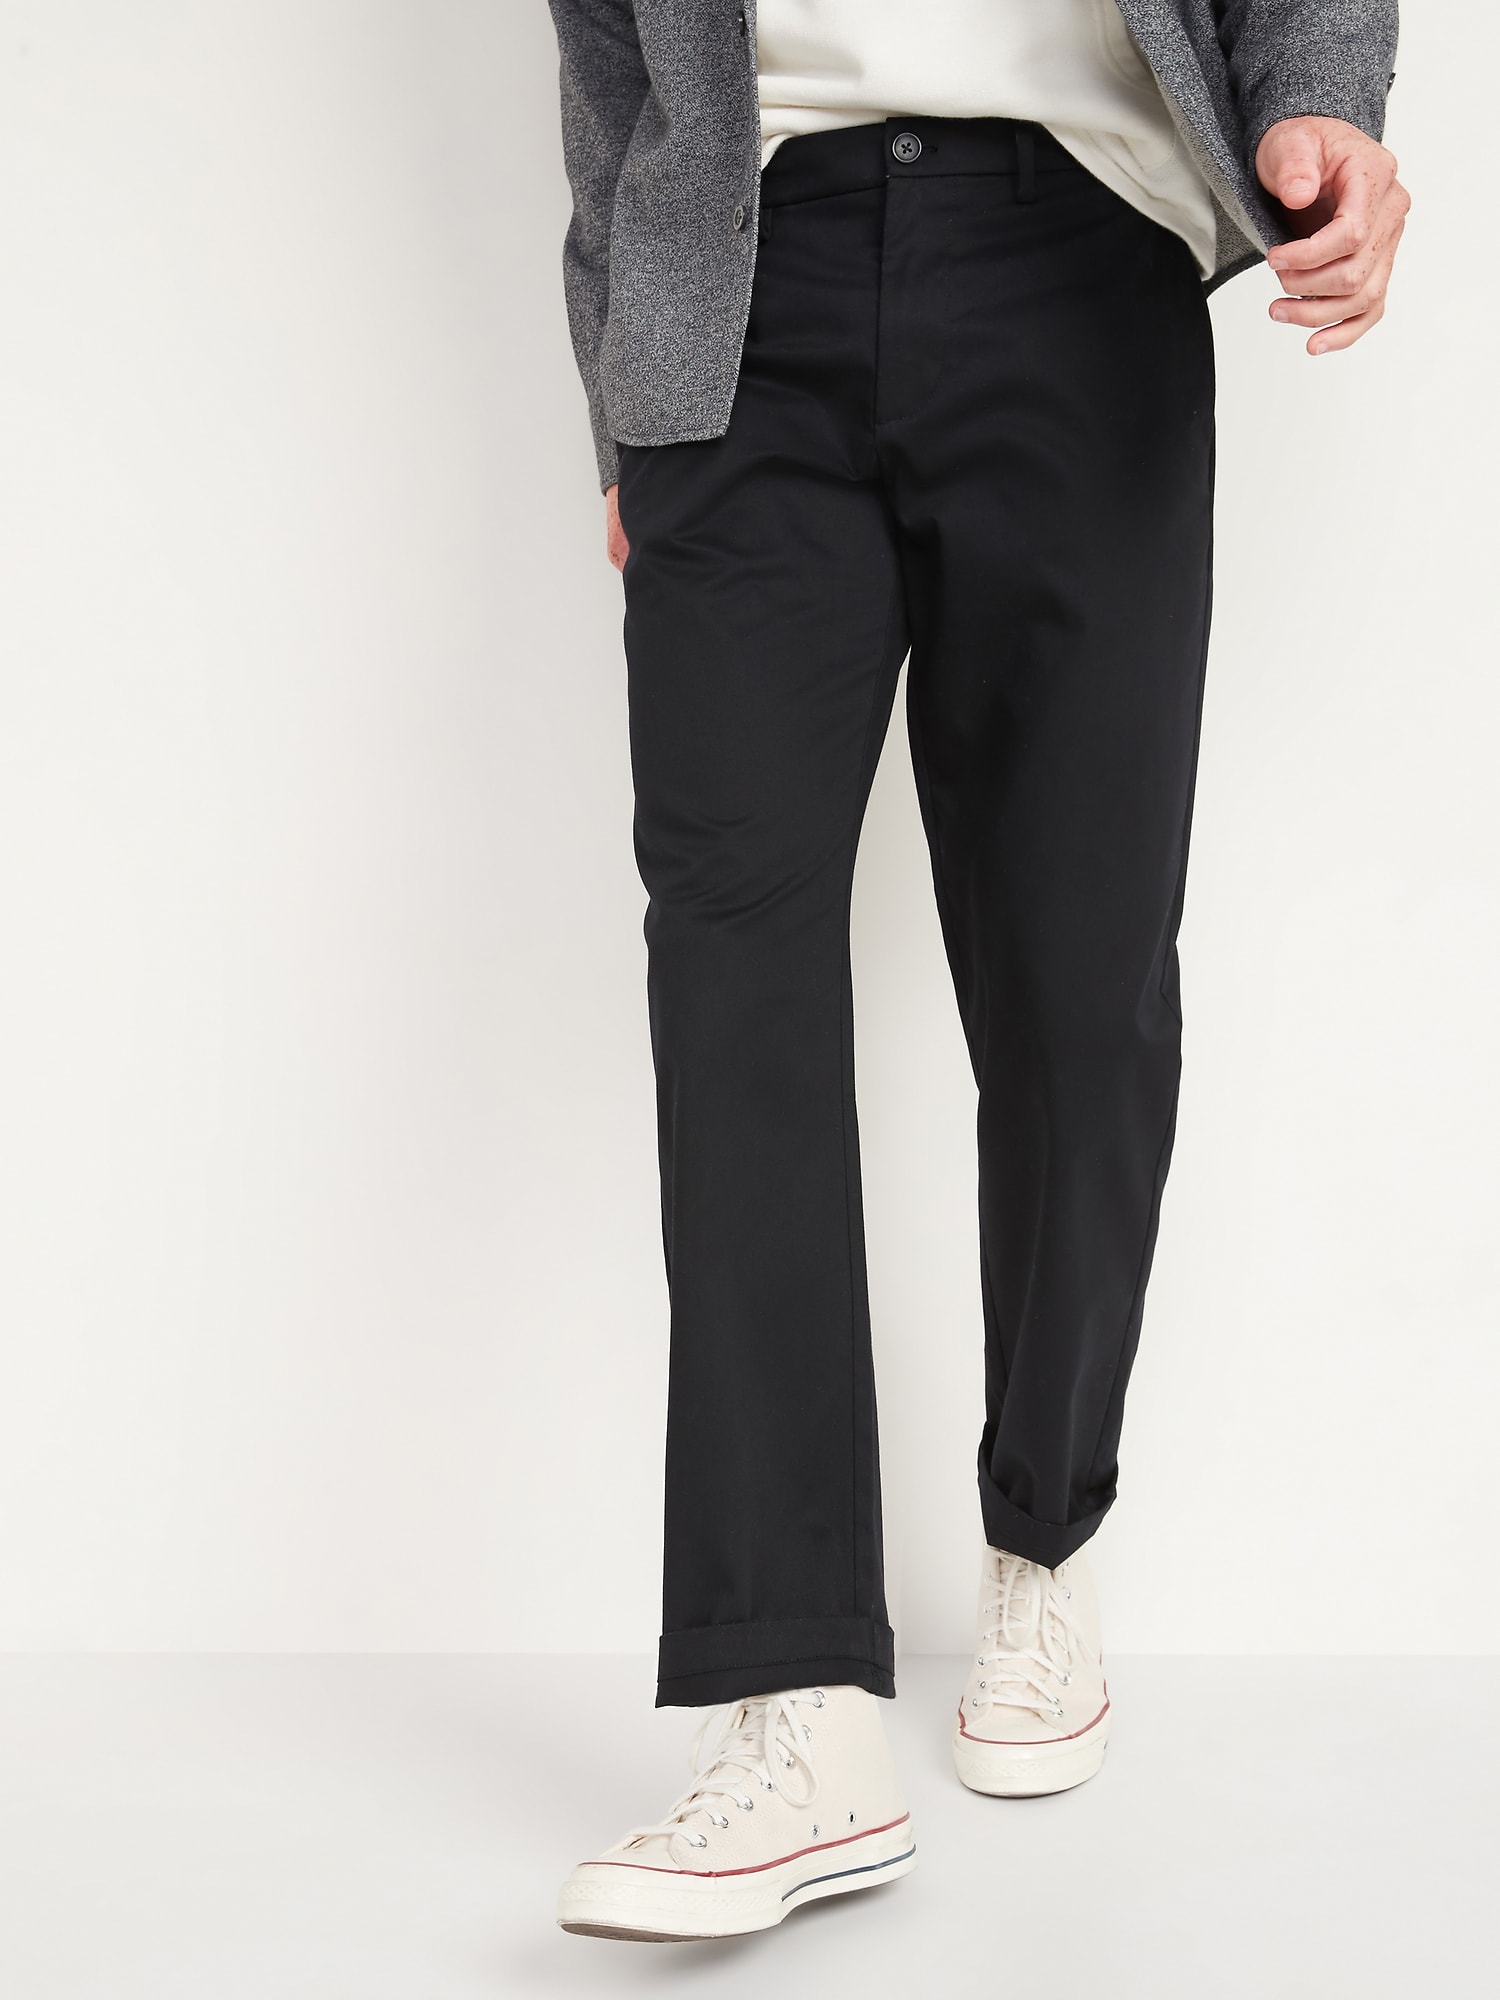 Loose Ultimate Built-In Flex Chino Pants